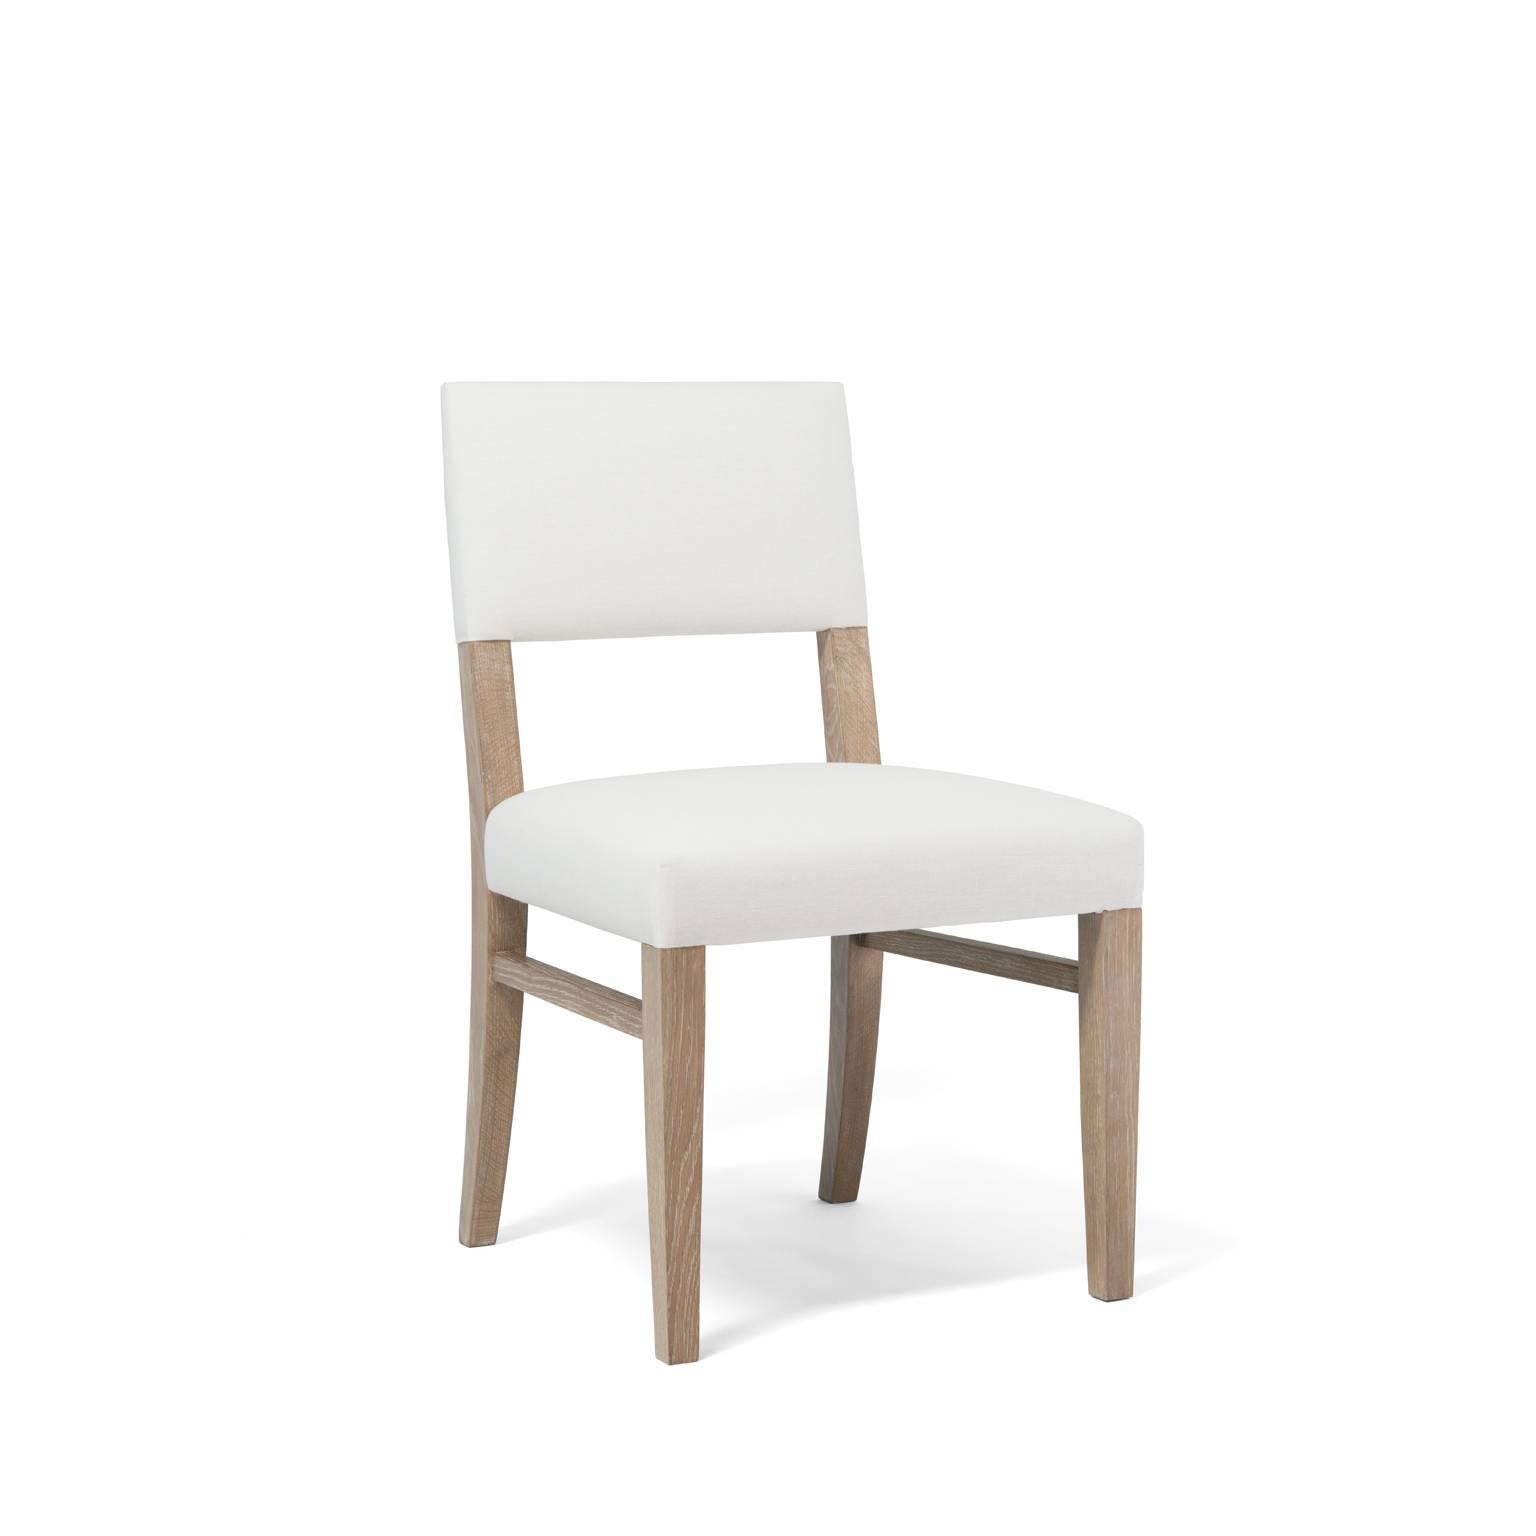 Atelier Demiurge Collection Marais Chair shown in white oak with cerused finish. Inquire for finish and customization options. COM 1 1/2 yards. 

Atelier Demiurge Collection pieces are made to order, and custom sizes are available. Please contact